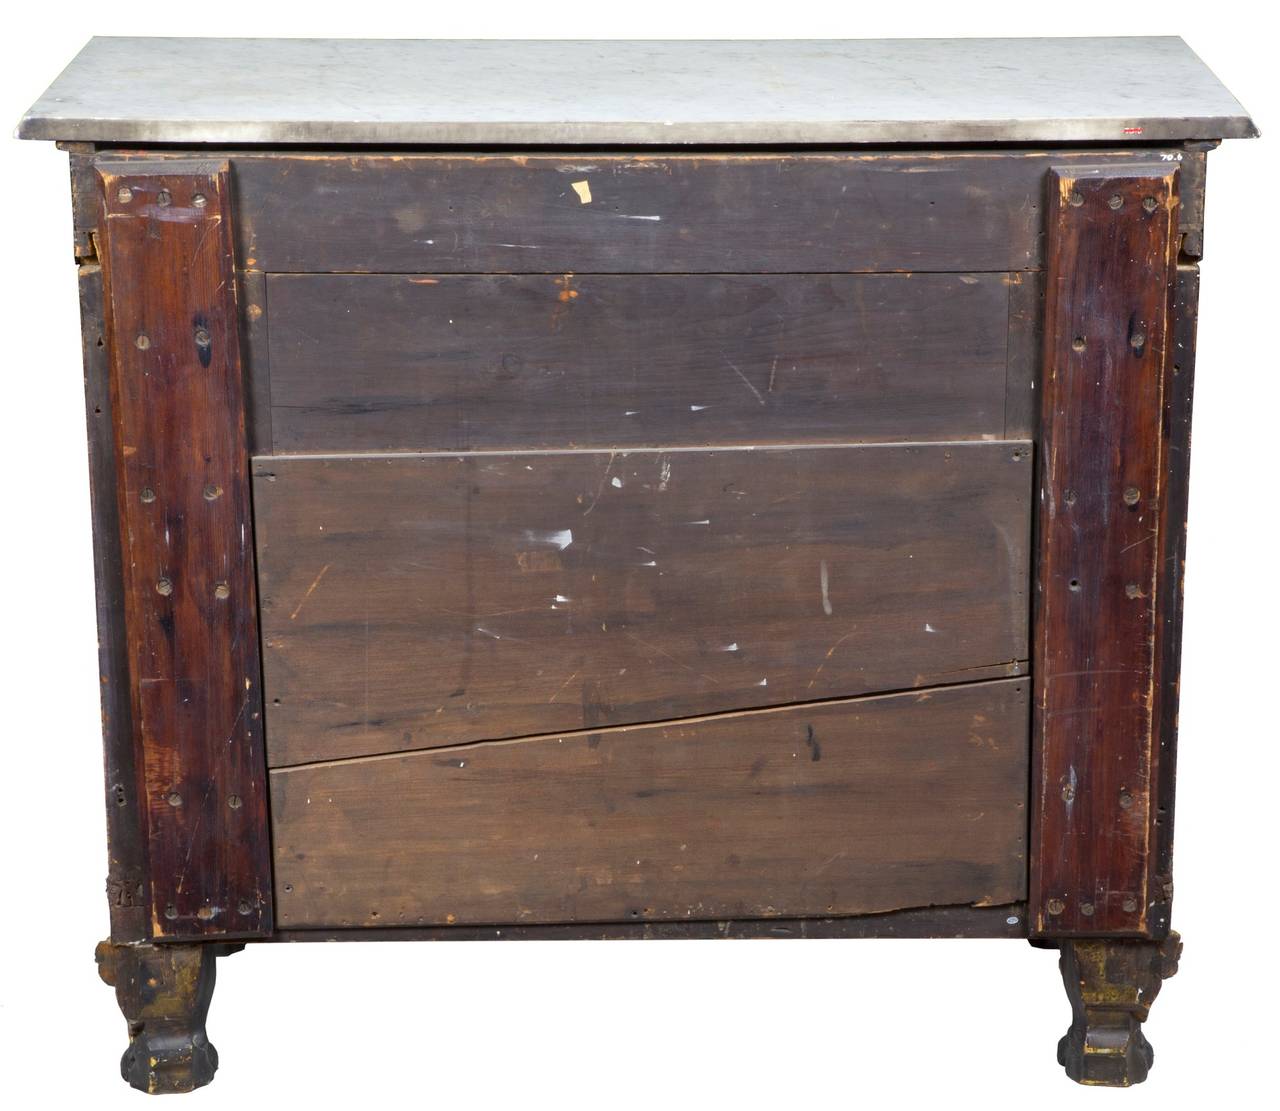 This pier table is in its original first surface and untouched condition. The beautiful marble columns are finished with gilt capitals and the aprons additionally have a Fine brass edging, as does the base. The stenciling is all there and the